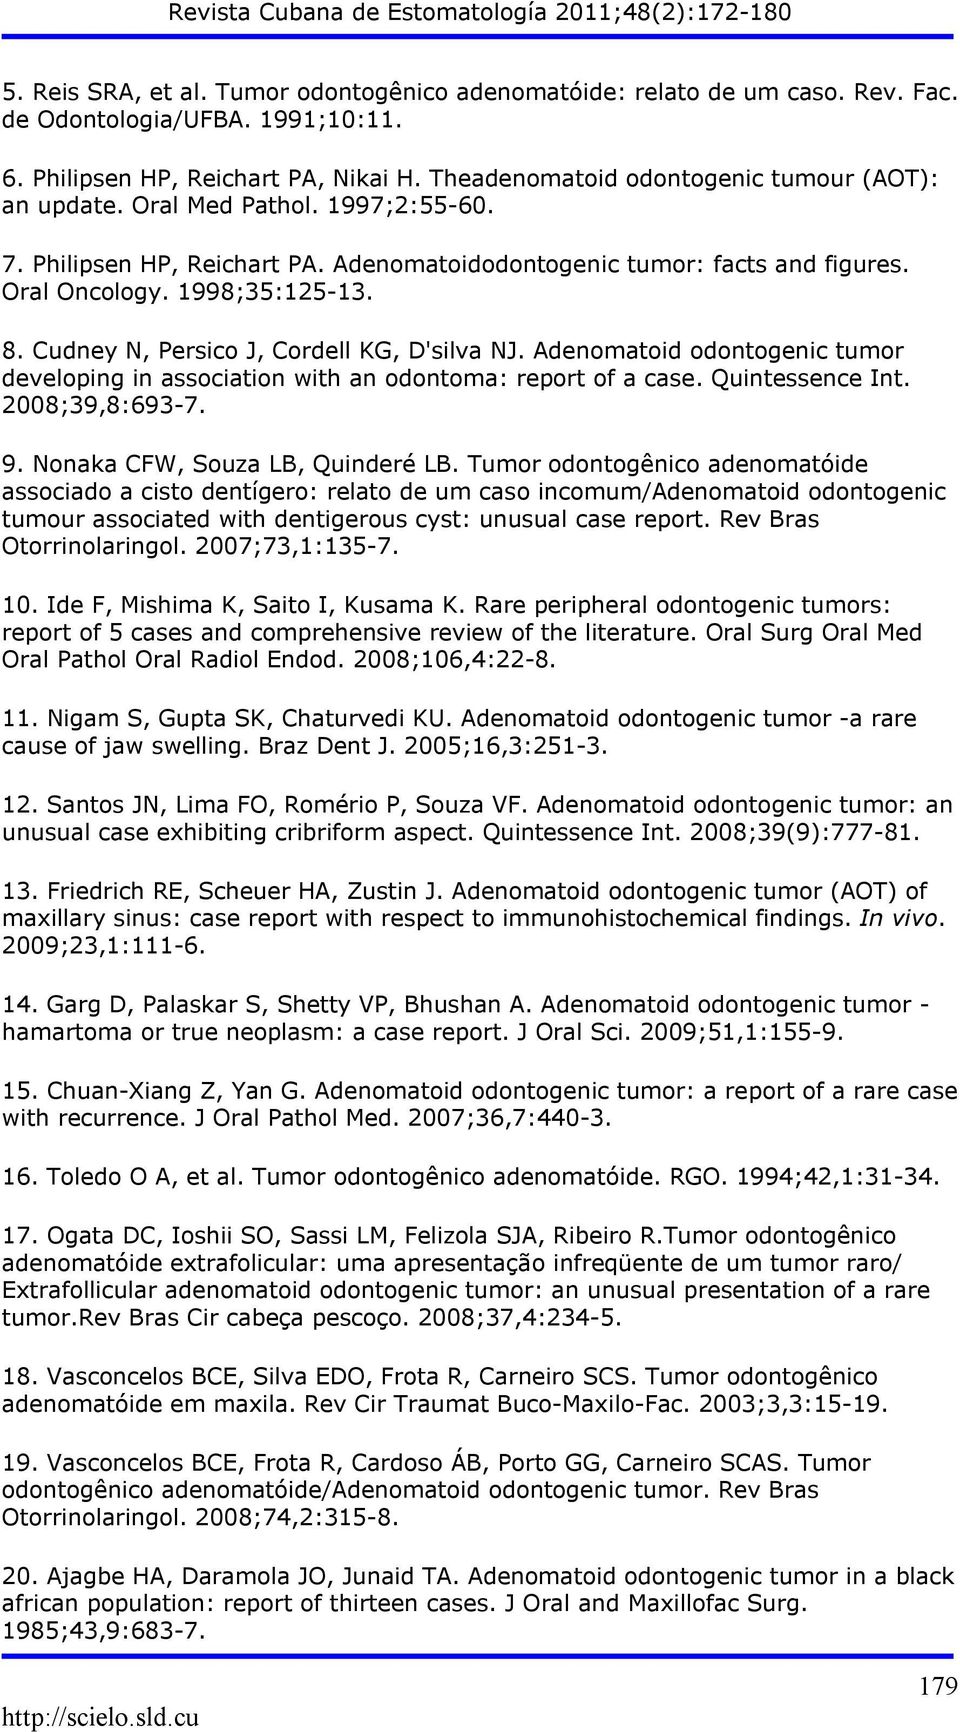 Cudney N, Persico J, Cordell KG, D'silva NJ. Adenomatoid odontogenic tumor developing in association with an odontoma: report of a case. Quintessence Int. 2008;39,8:693-7. 9.